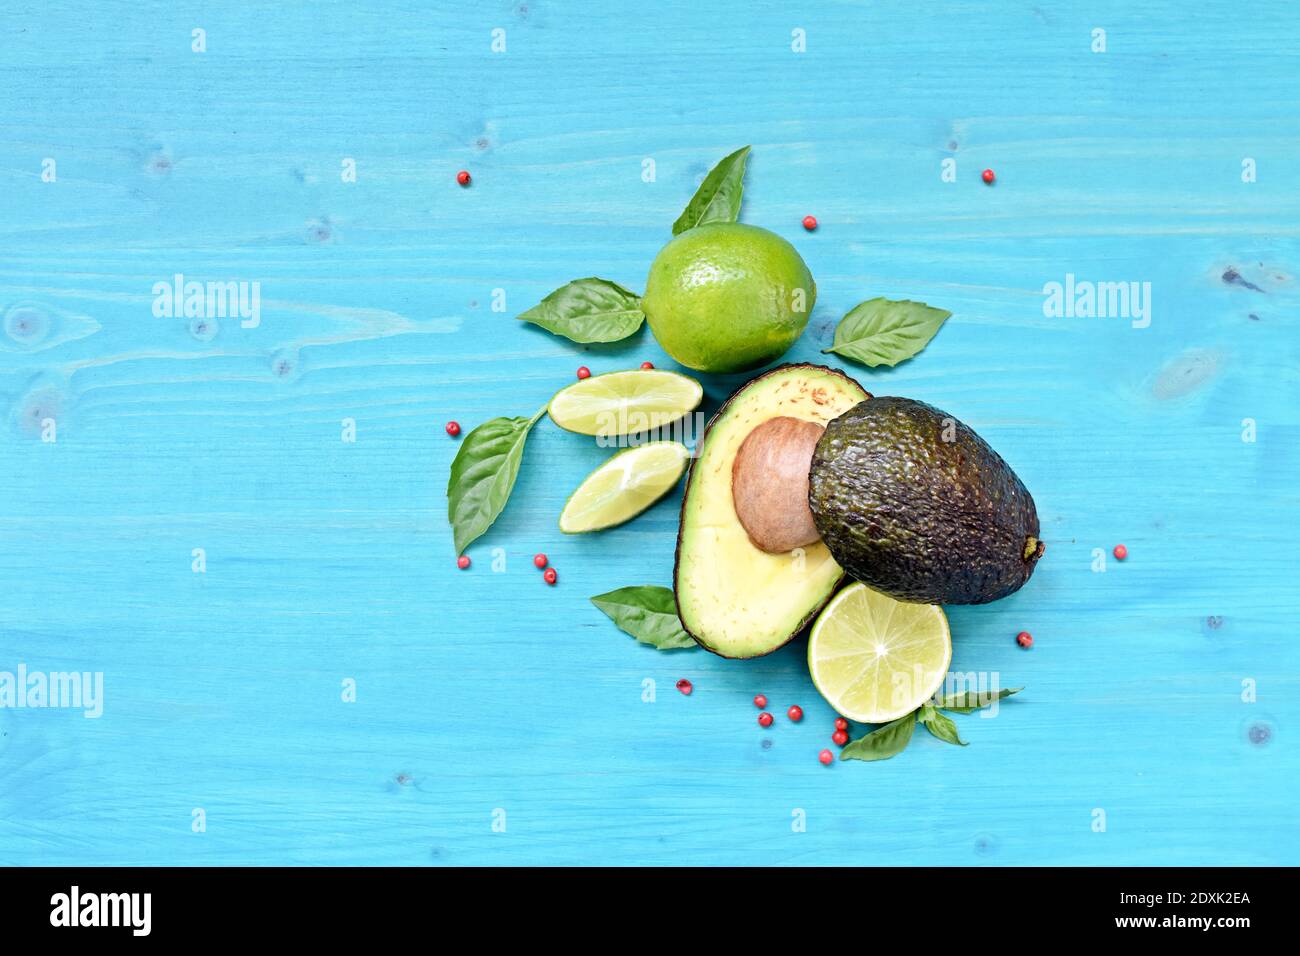 Top dish with raw food. Avocado, limes, lemons and mint on blue background. Copy space text. Stock Photo